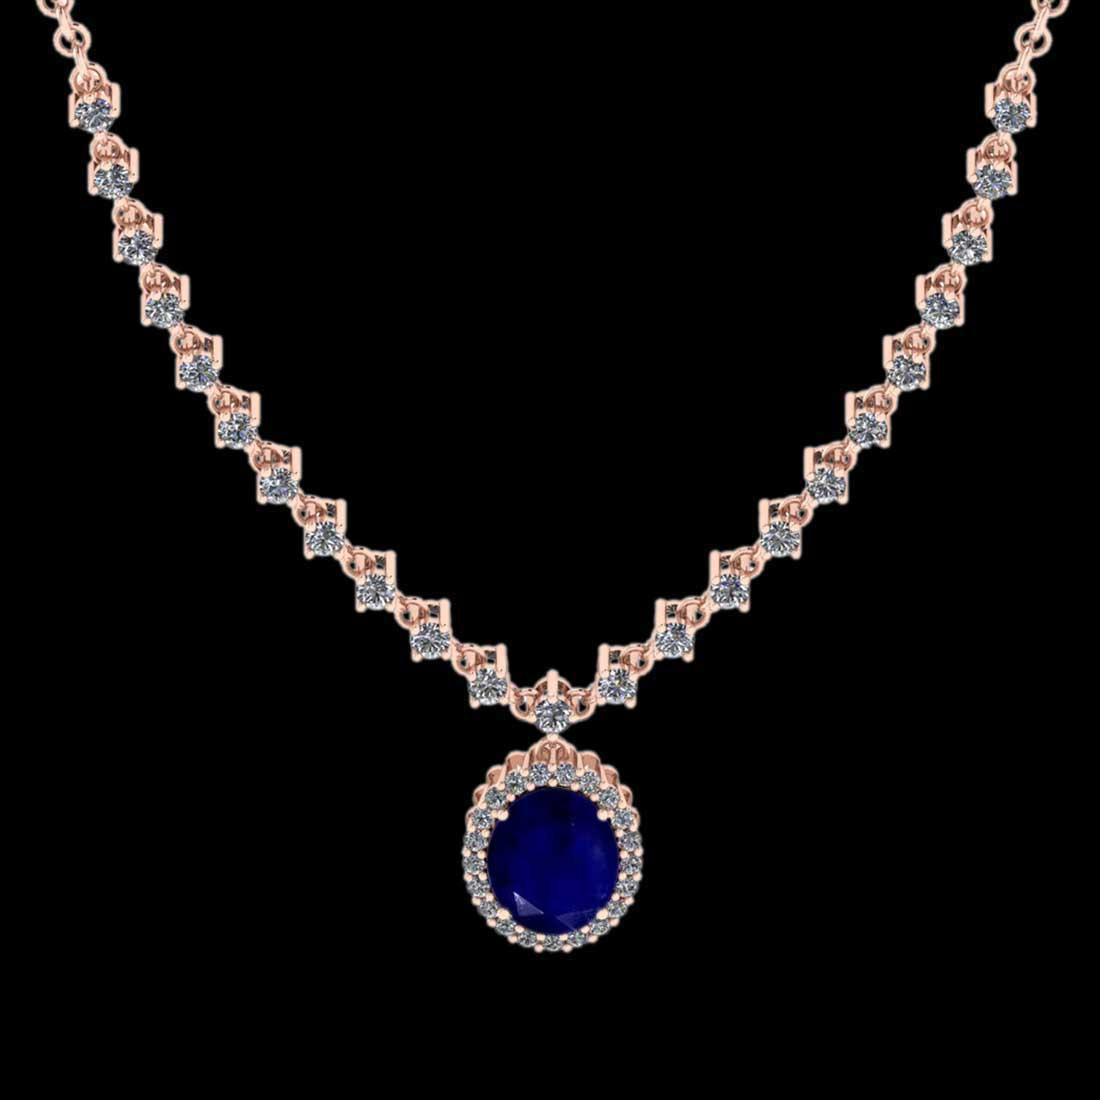 8.03 Ctw VS/SI1 Blue sapphire and Diamond 14K Rose Gold Necklace (ALL DIAMOND ARE LAB GROWN )